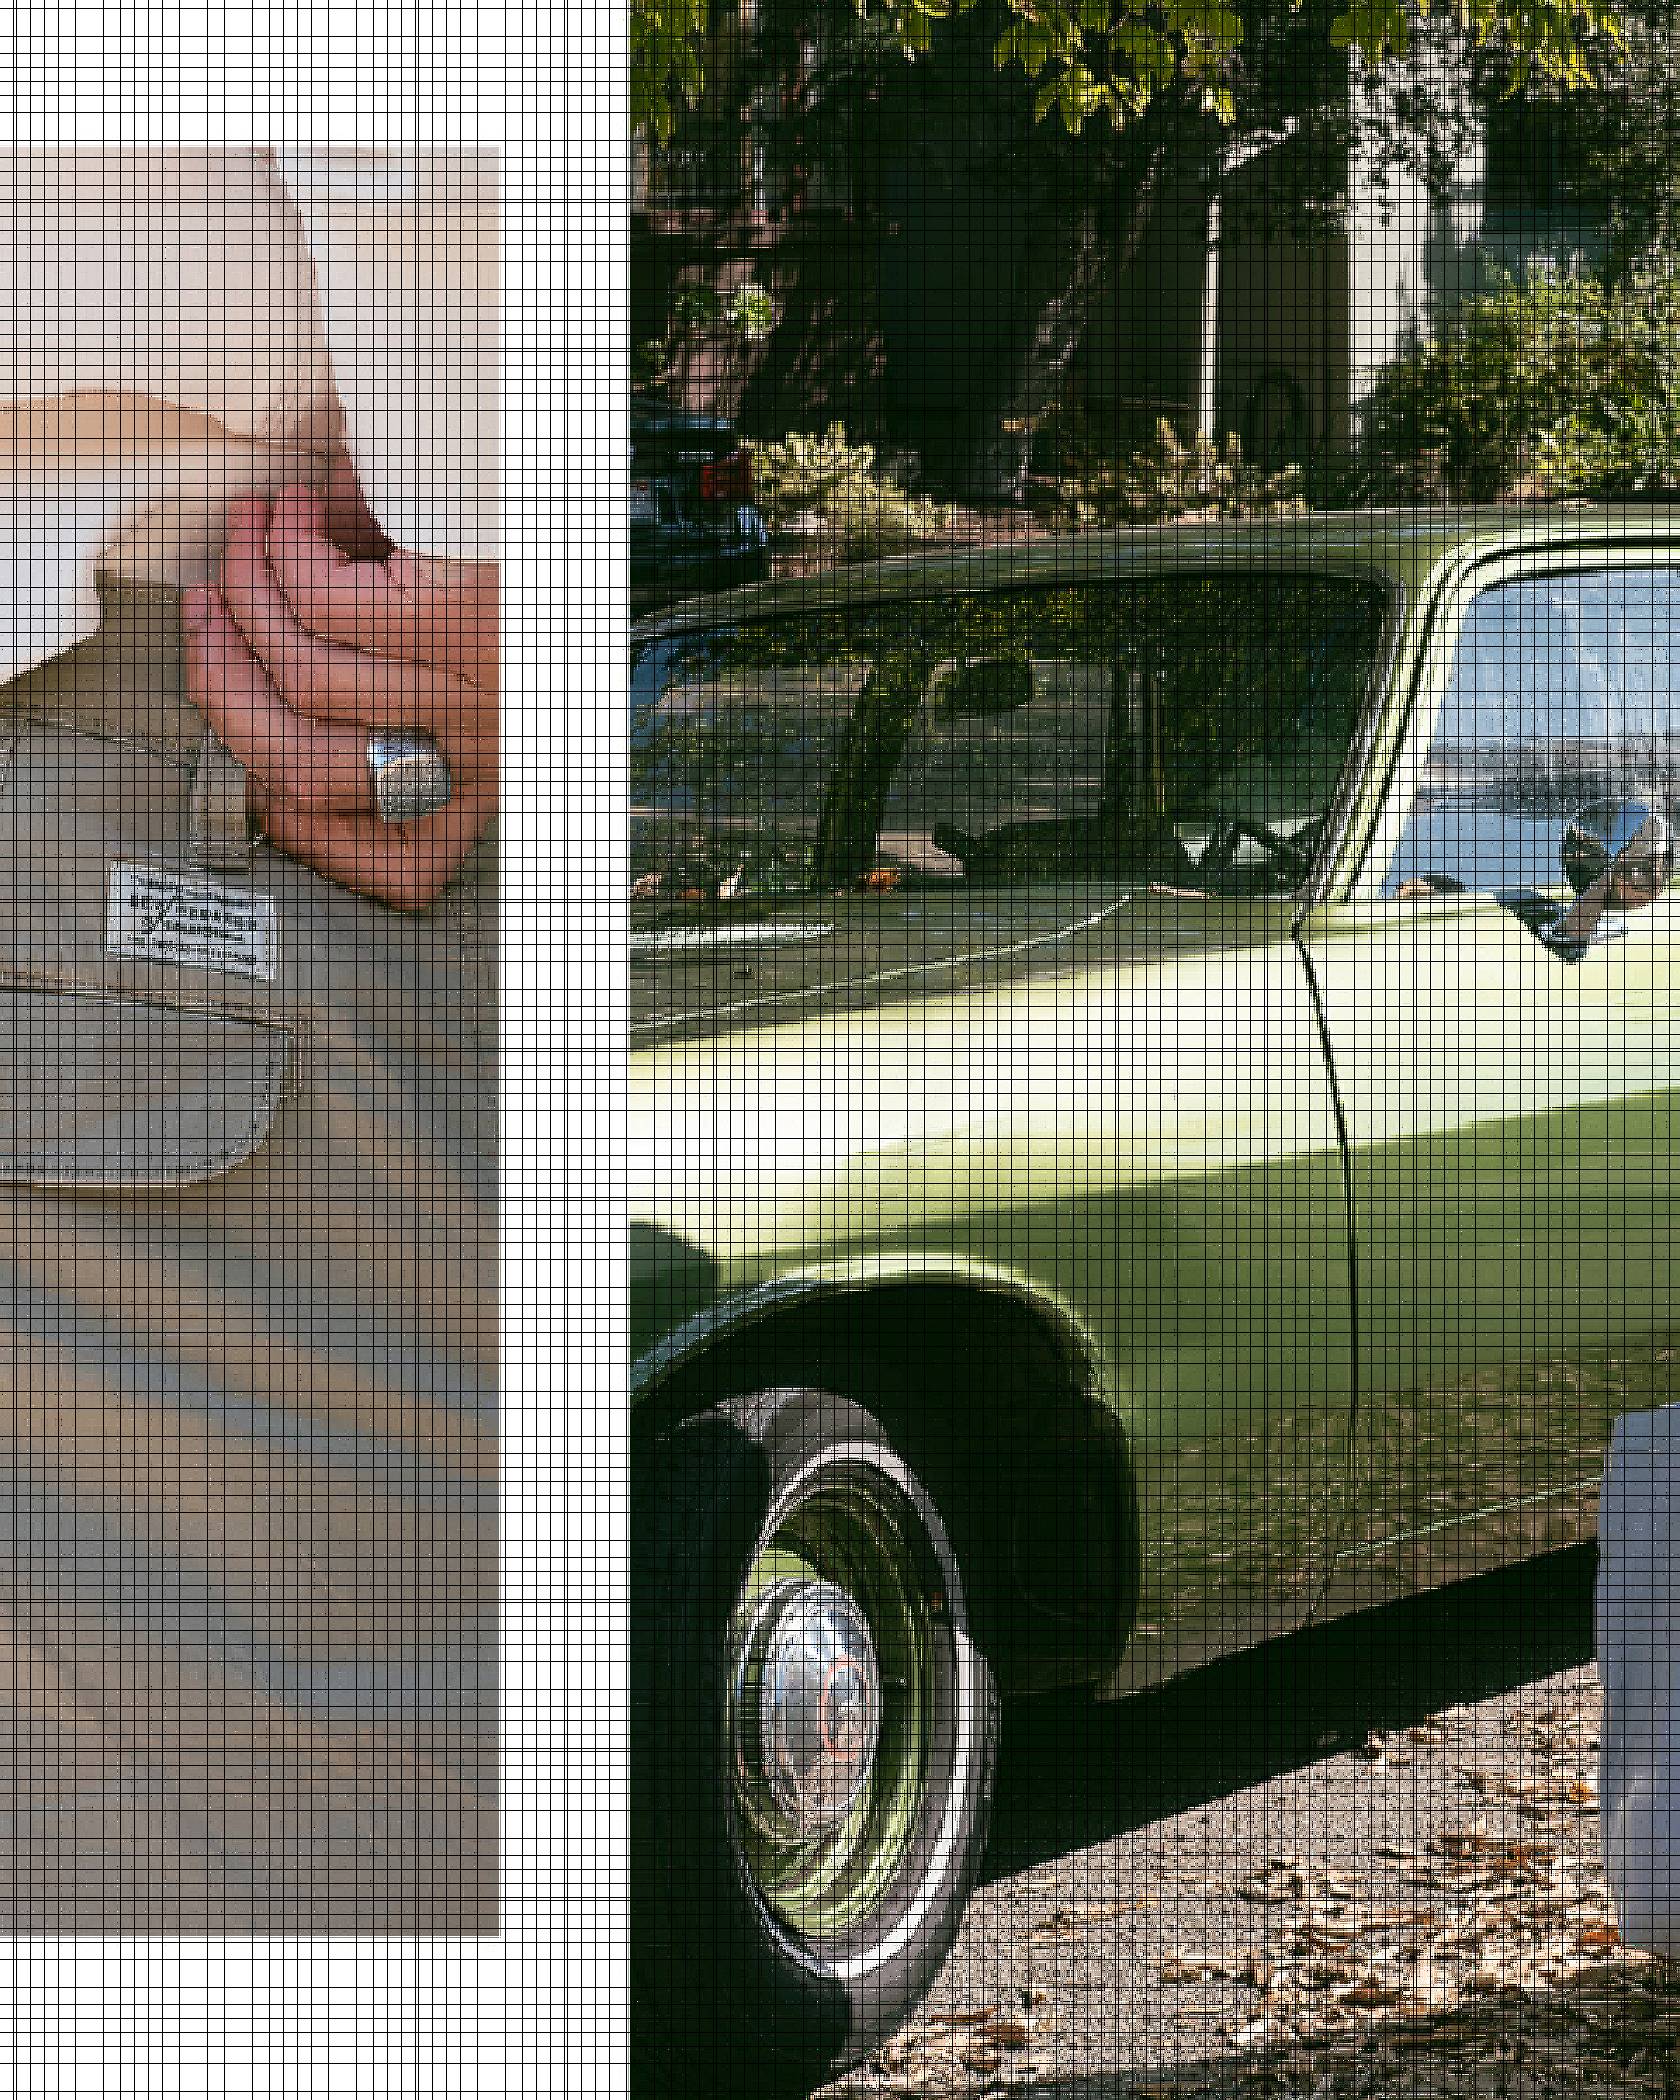 Two images of Paul Bellas. The left image is a close-up shot of the Levi's® Cargo Pants he's wearing. The right side is a further out shot of Paul standing in front of a vintage green car while wearing a white hoodie, cargo pants, and carrying a light blue denim tote.